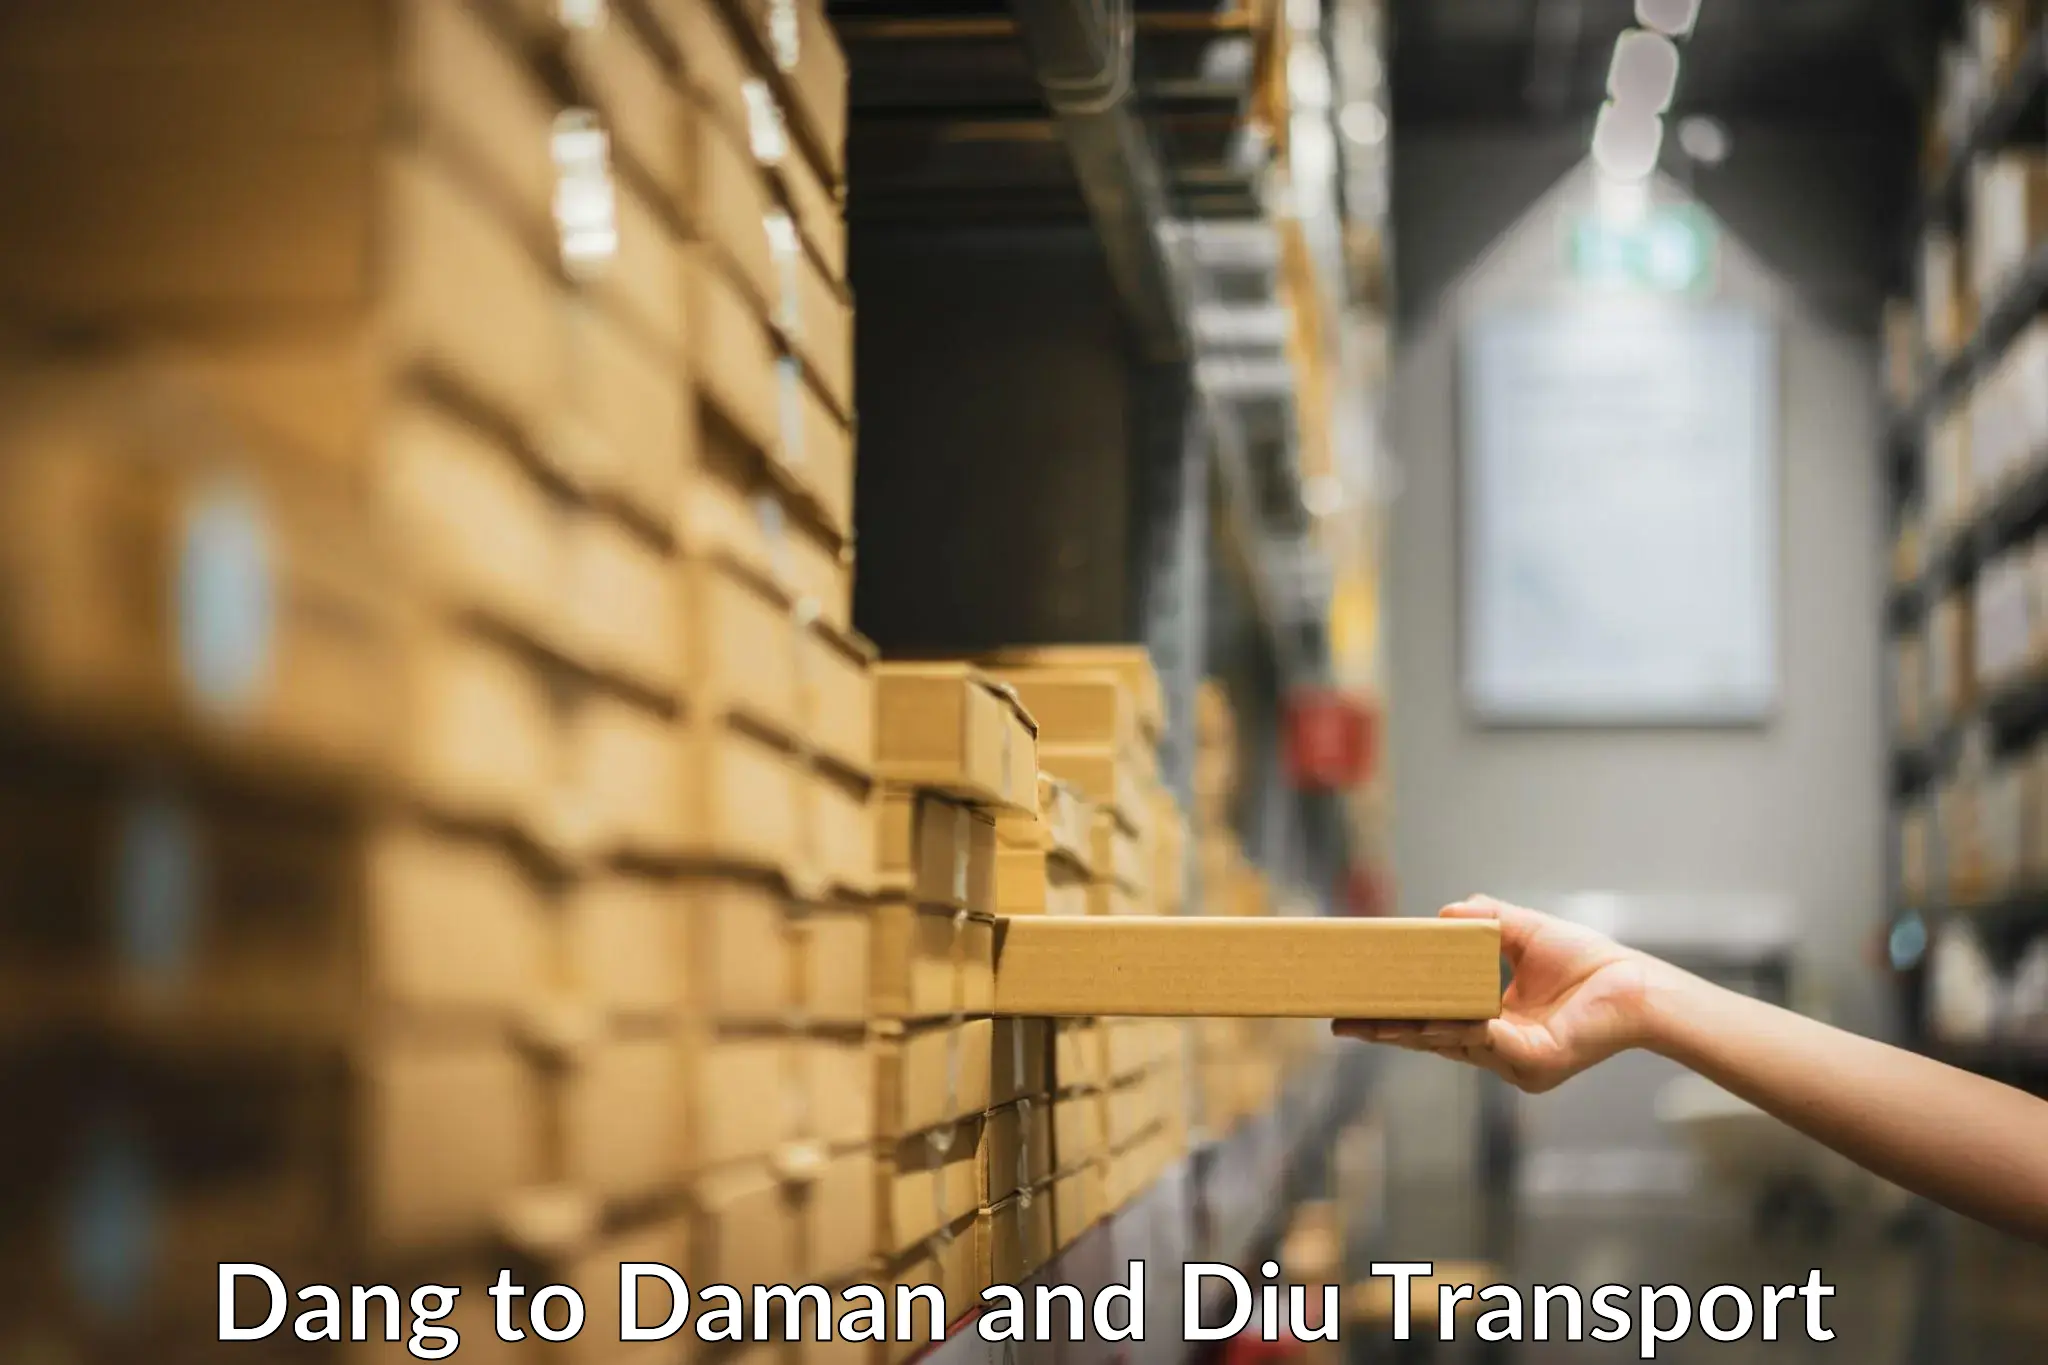 Package delivery services Dang to Diu